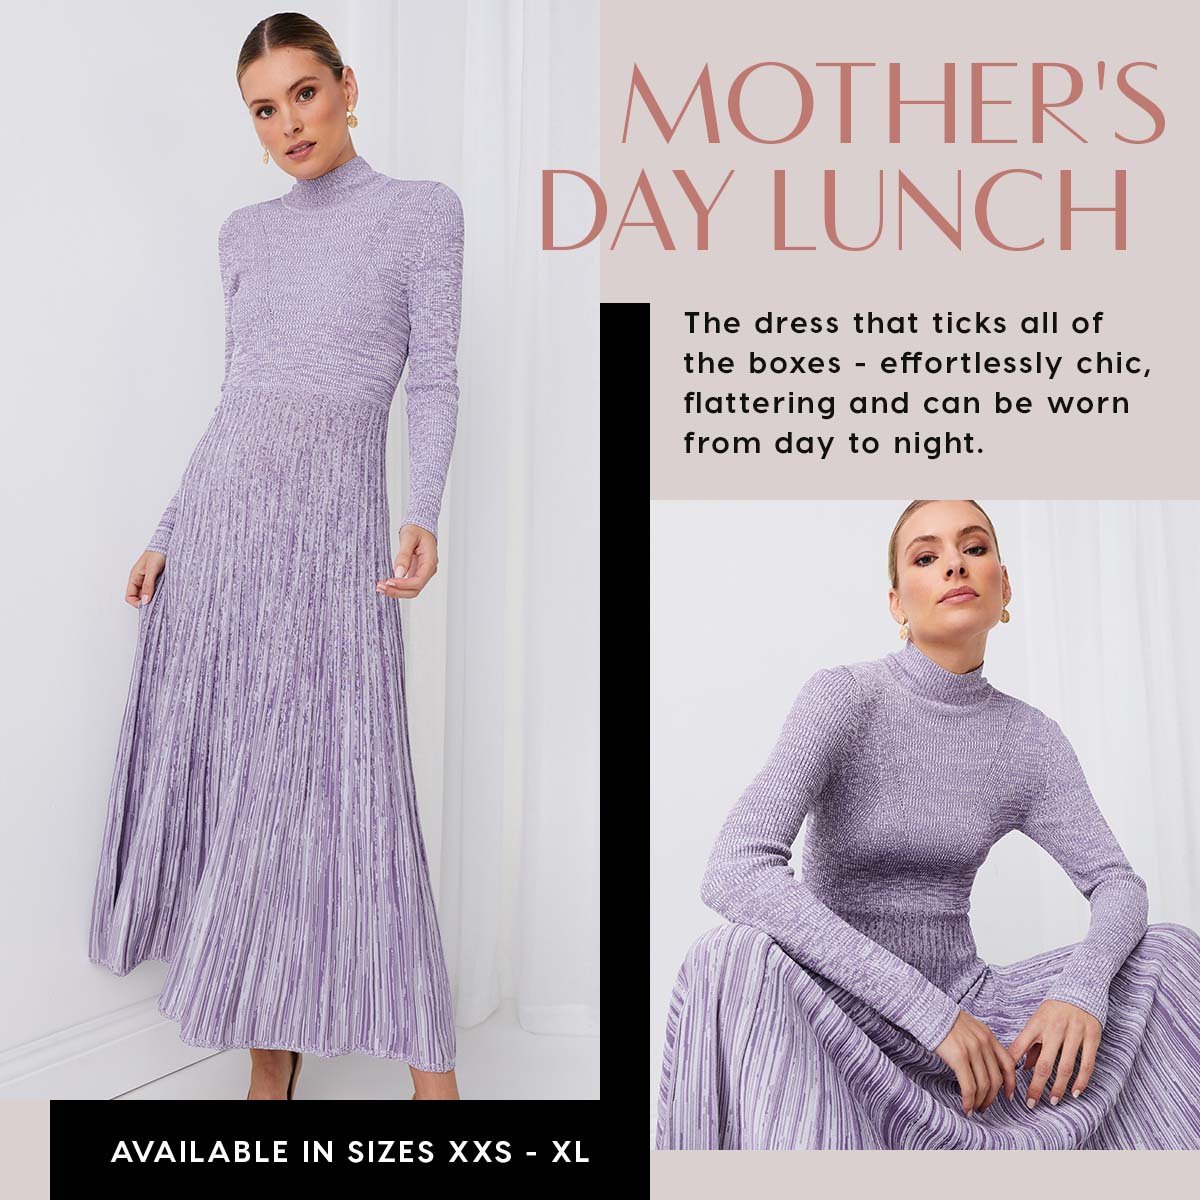 Mother's Day Lunch. The dress that ticks all of  the boxes - effortlessly chic, flattering and can be worn from day to night.